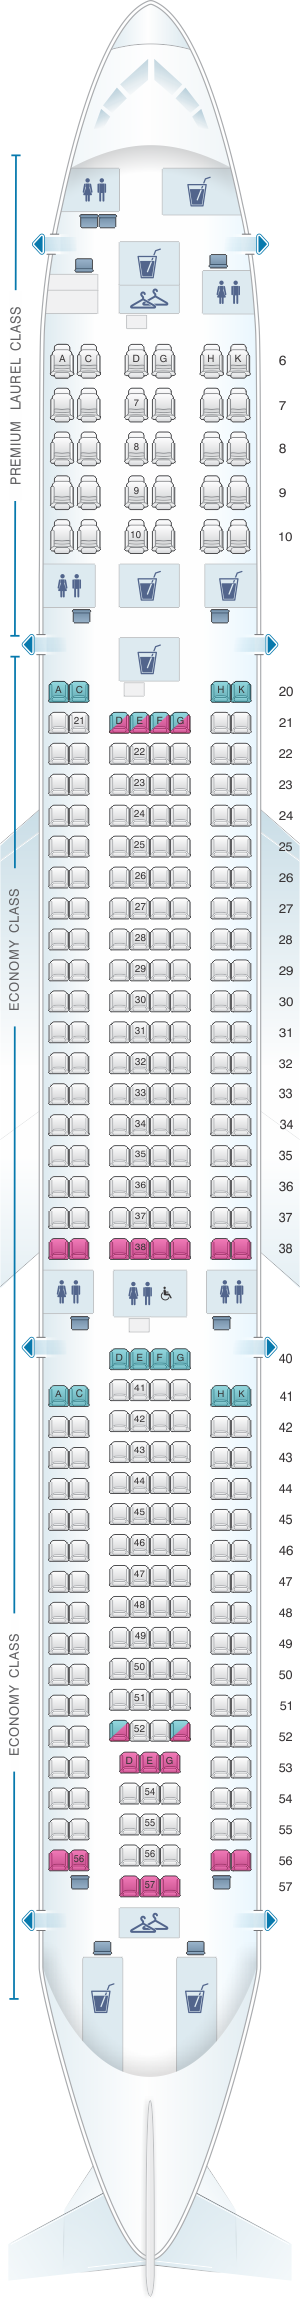 Seat map for EVA Air Airbus A330 300